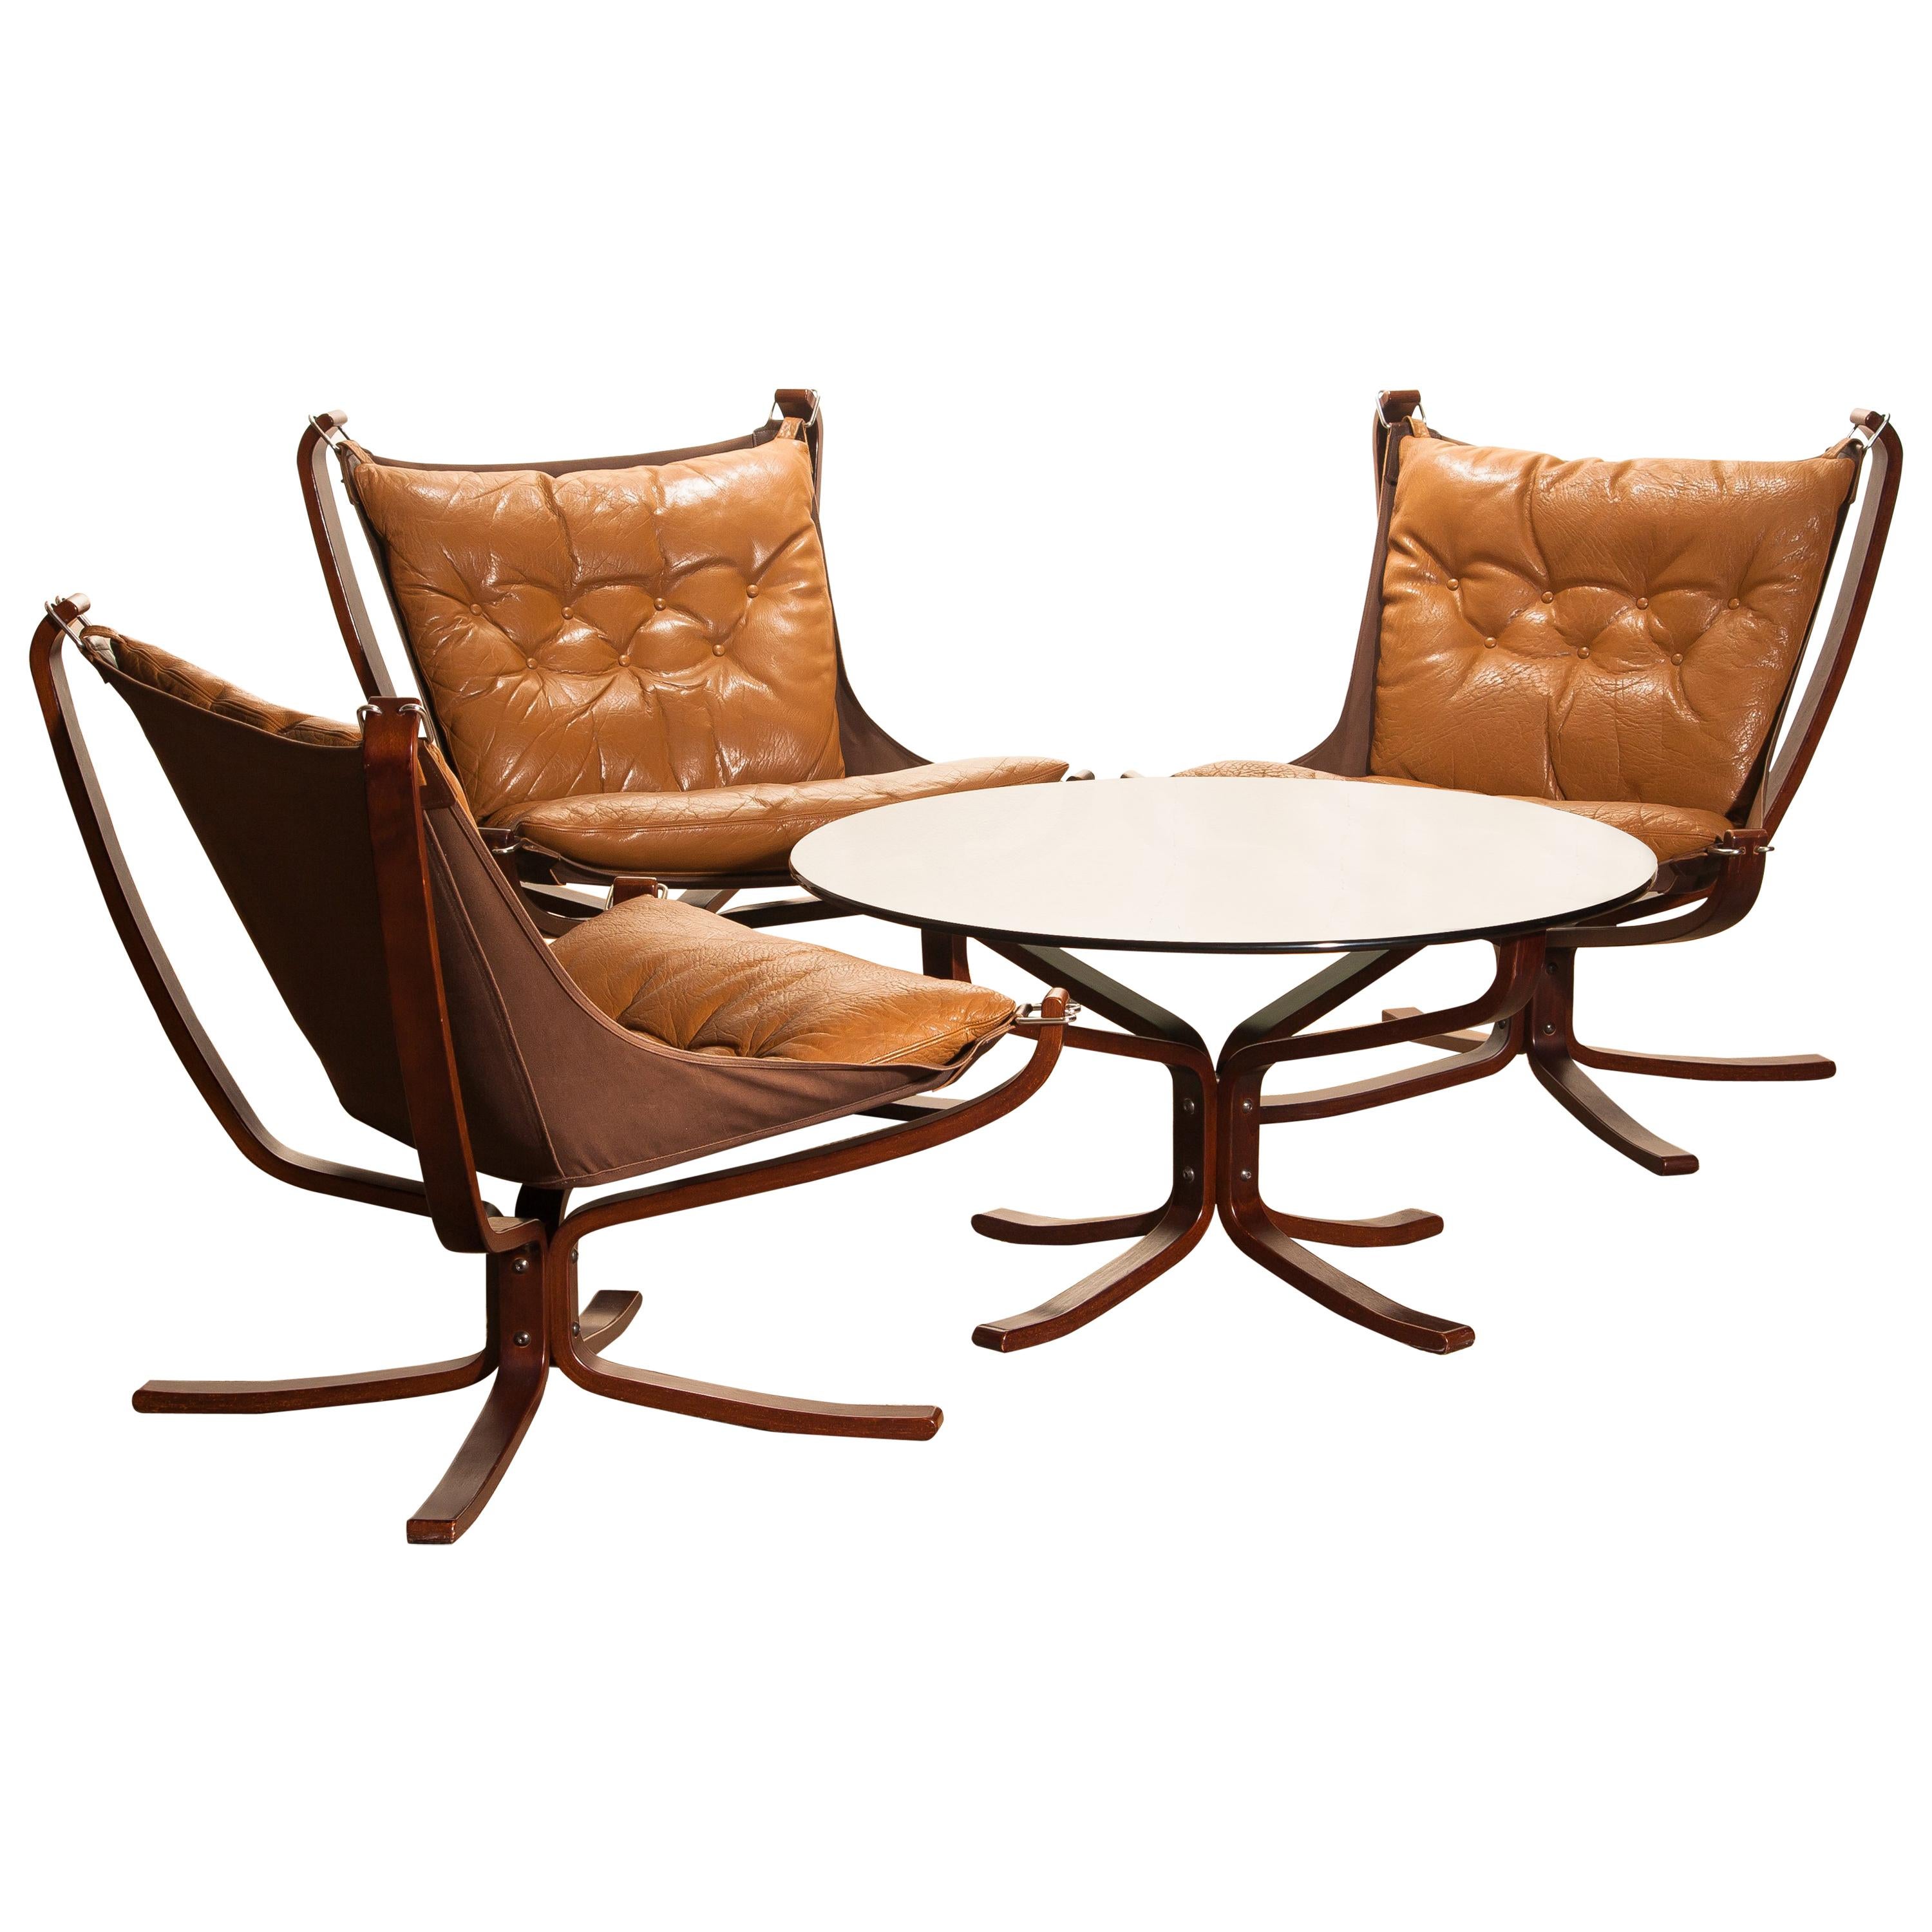 Three Camel Leather 'Falcon' Lounge Chairs and Coffee Table by Sigurd Ressell